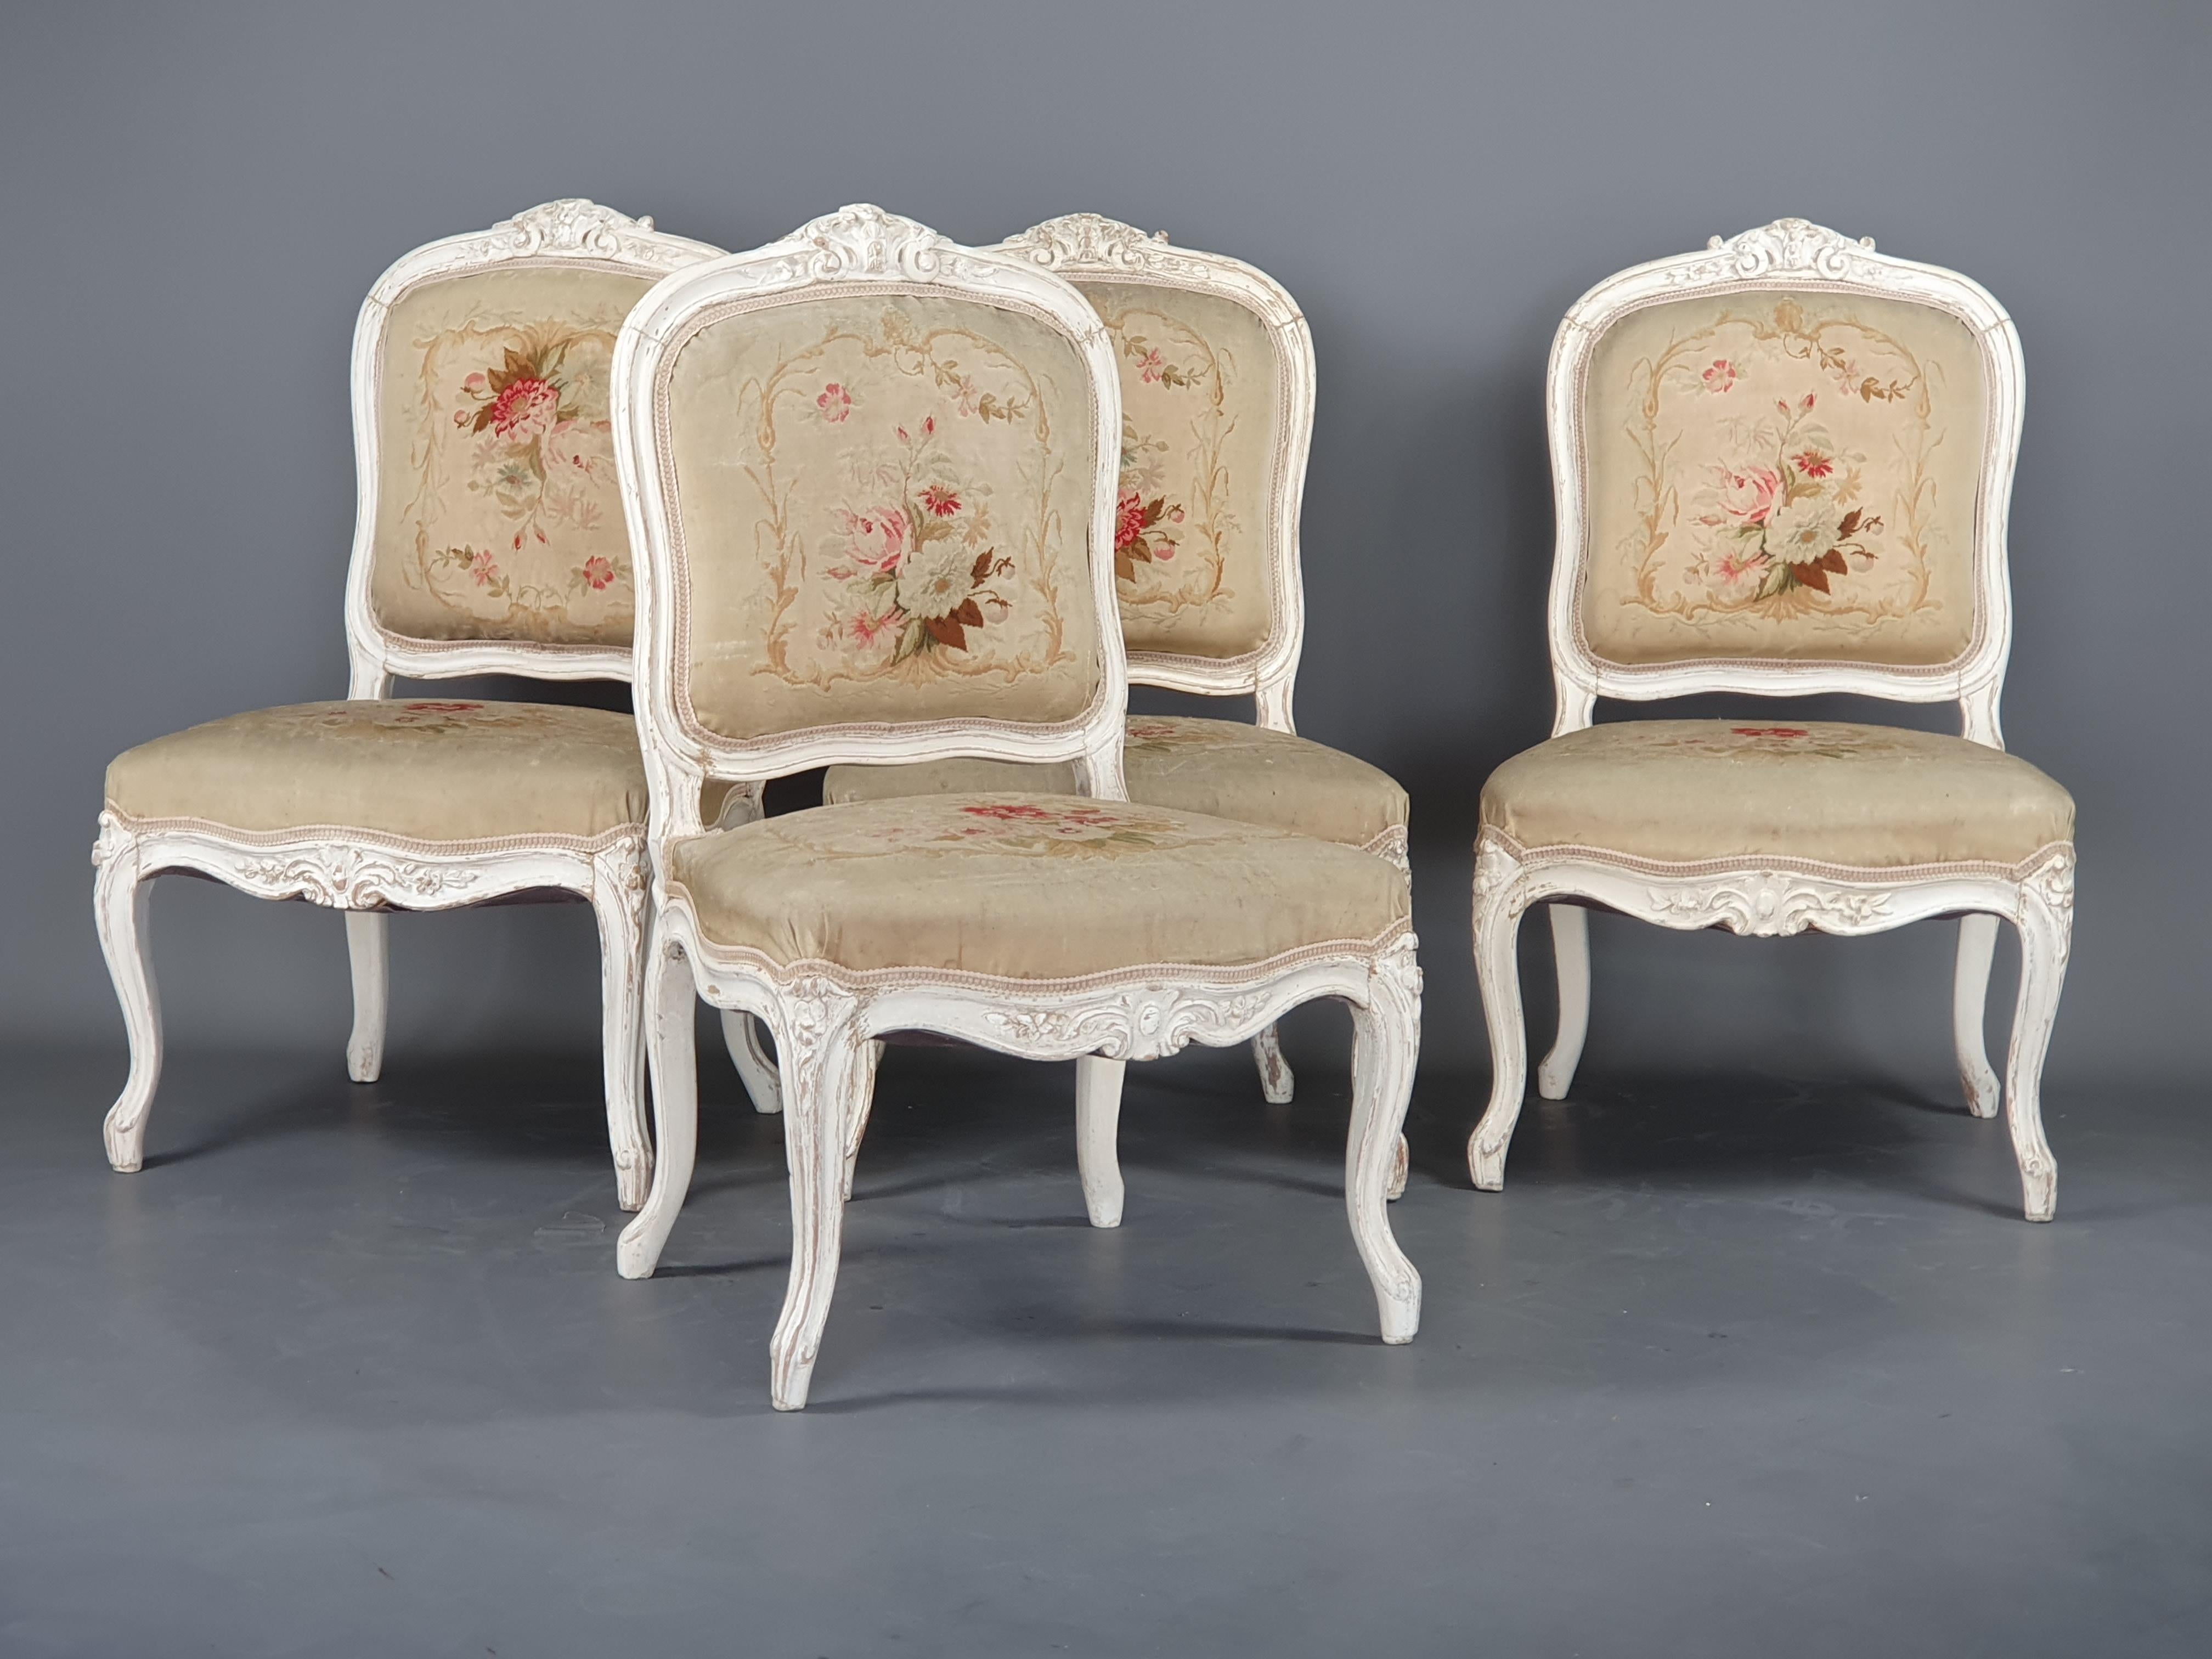 Suite of four Louis XV style fireside chairs in carved and white lacquered wood, beautiful upholstery in Aubusson Tapestry decorated with flower throws and foliage.

Work from the Napoleon III period

Very good general condition: Tapestry in